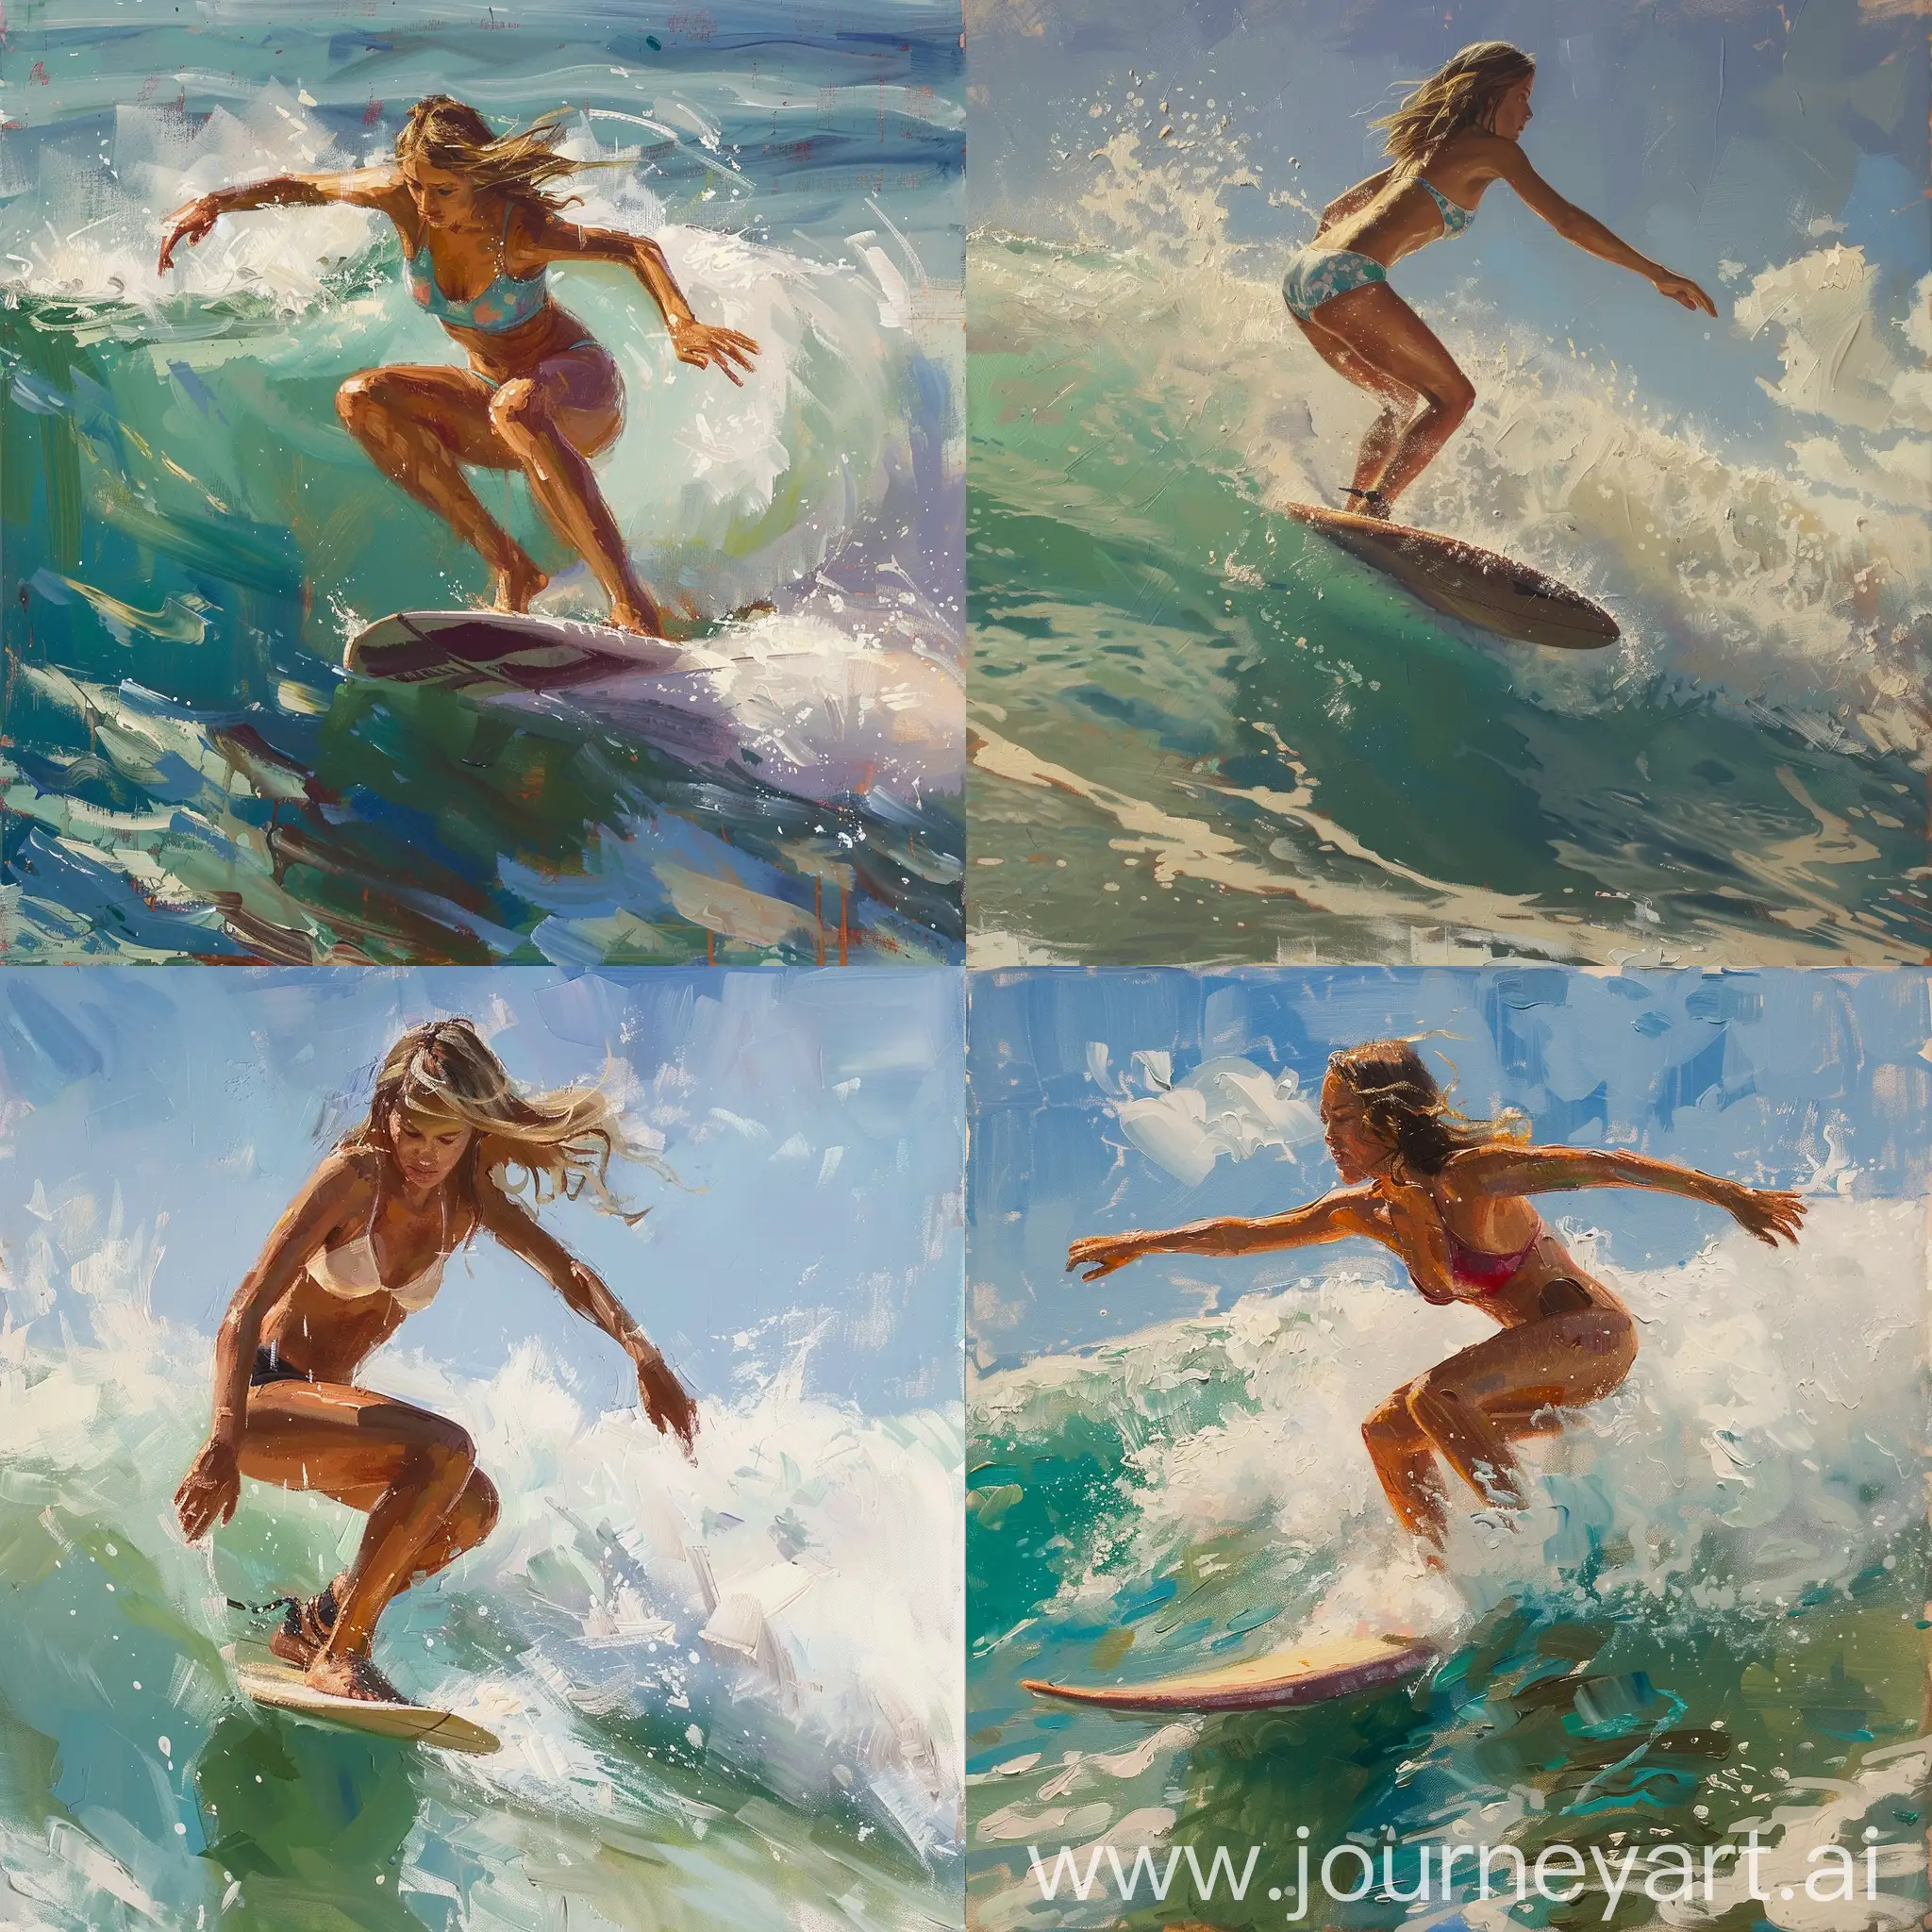 Young-Female-Surfer-Riding-Waves-in-Serene-Ocean-Landscape